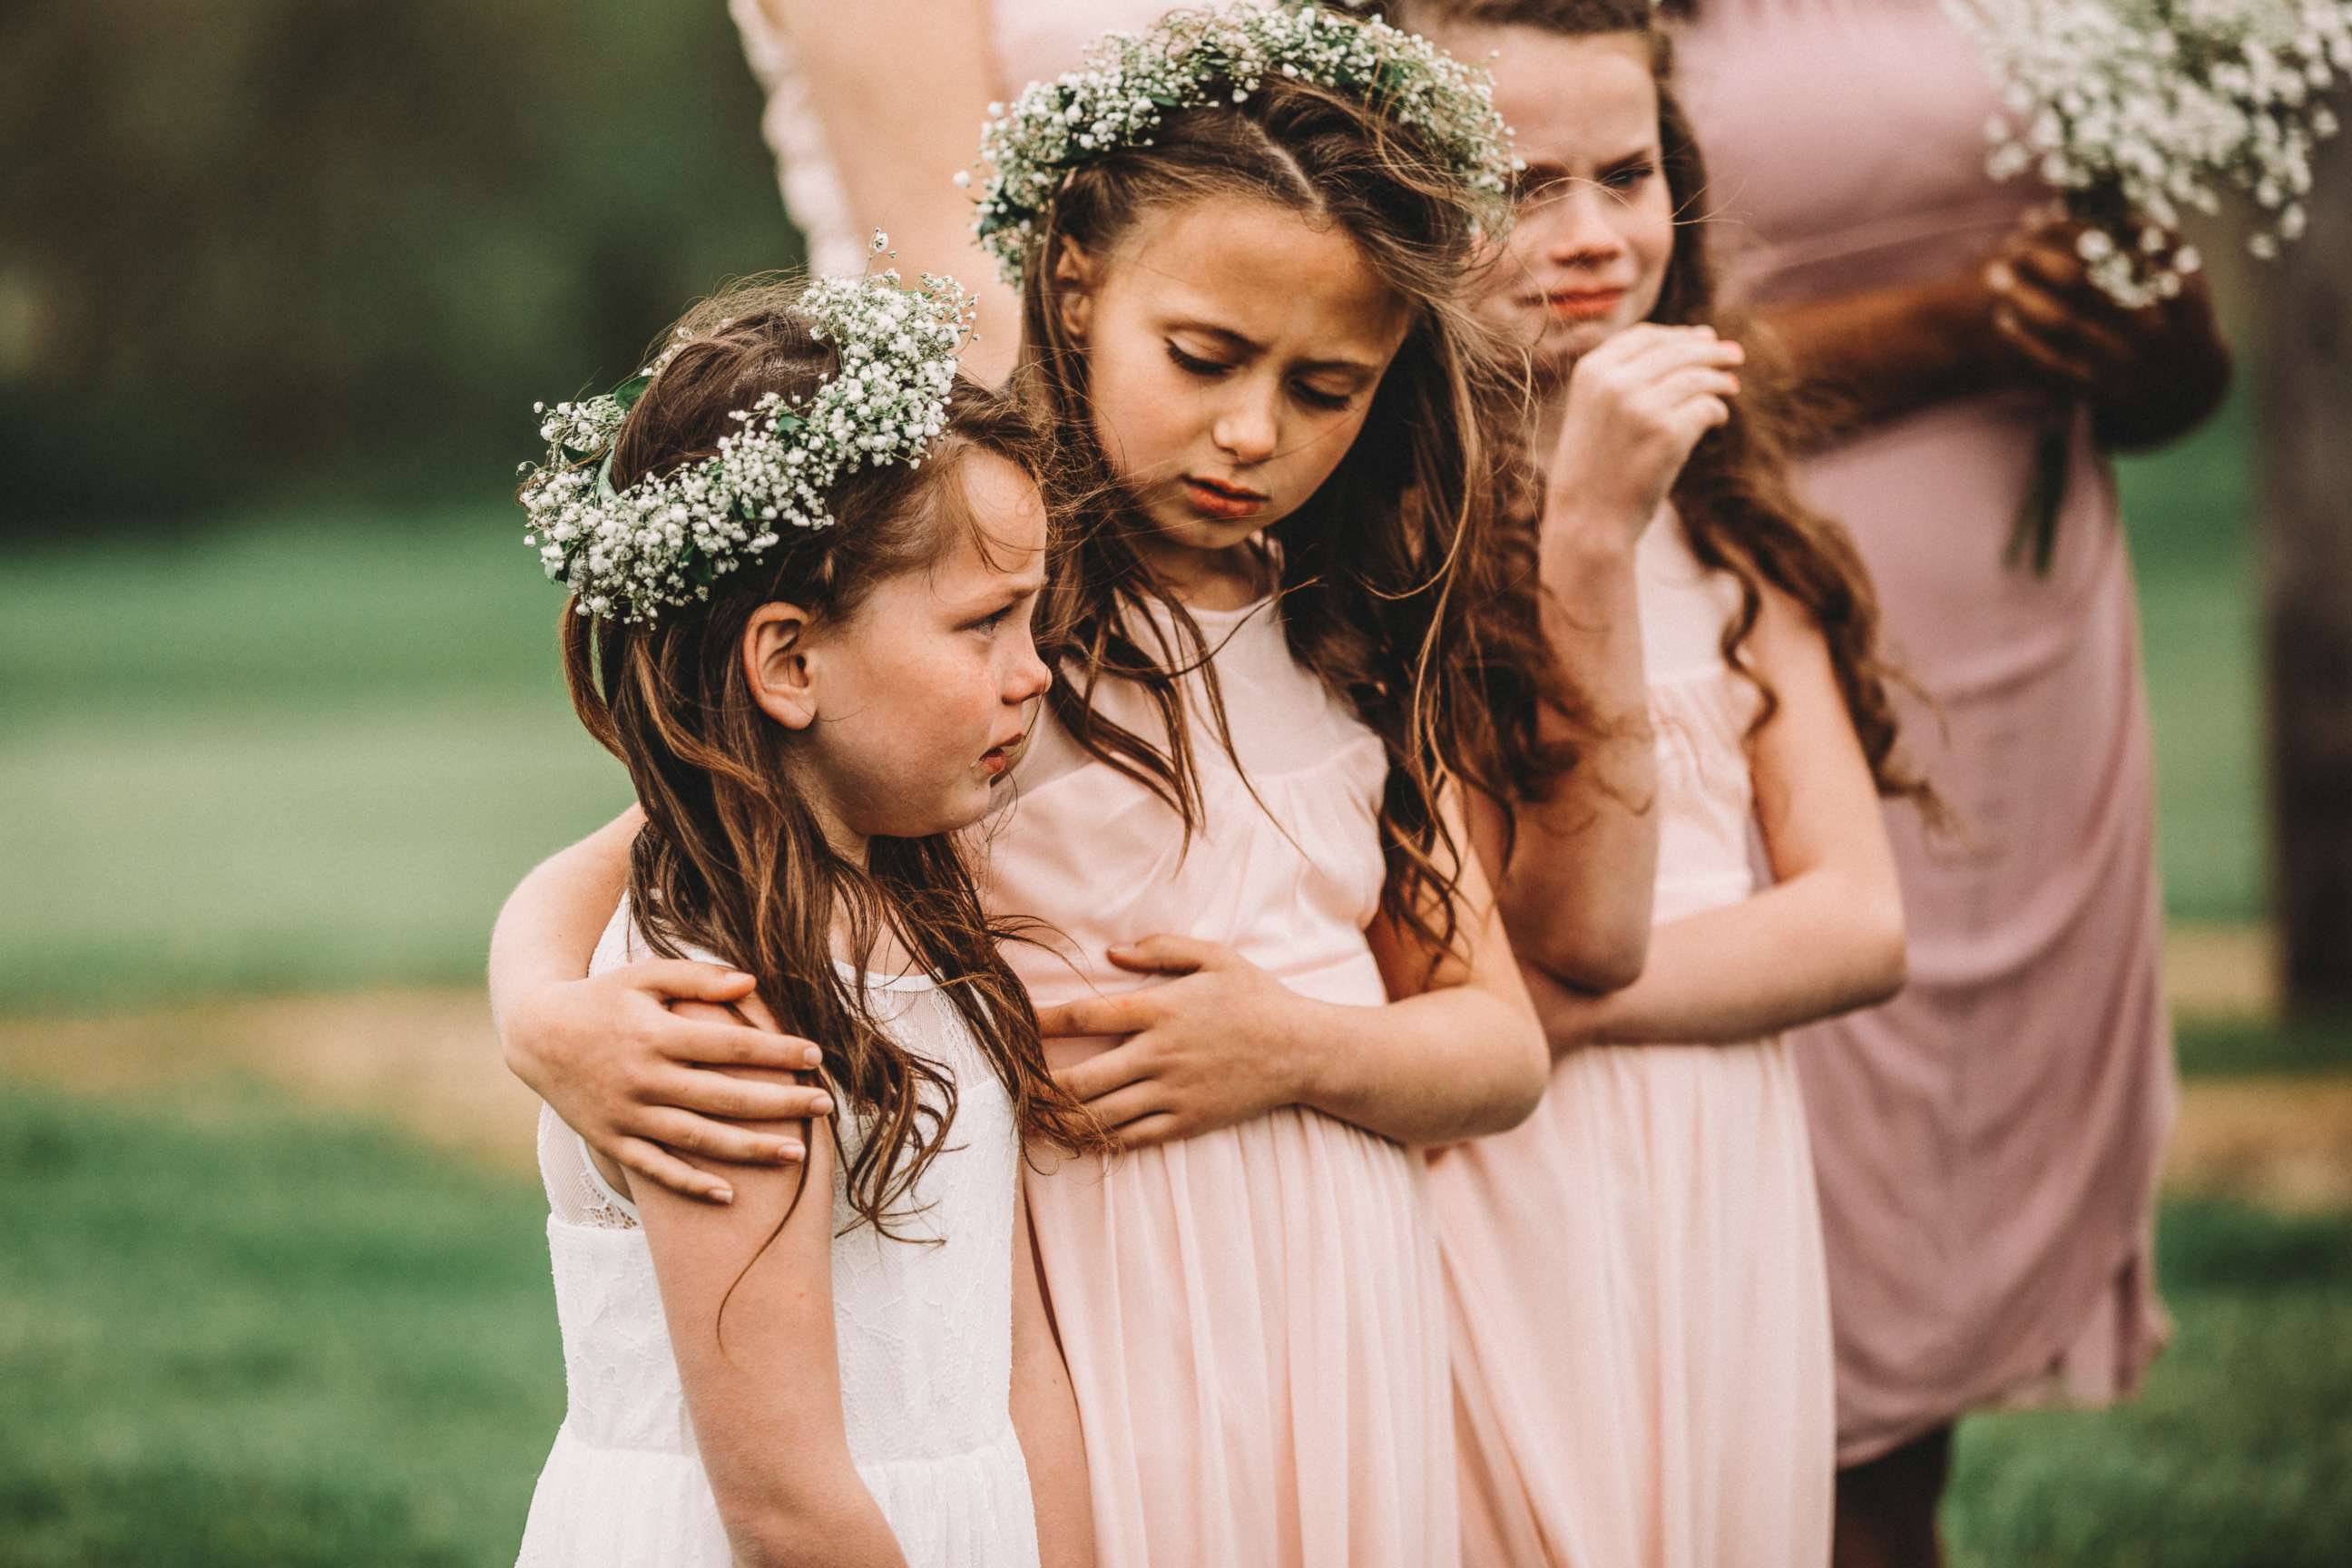 PHOTO: Riley Gibson, 8, comforts her sister Lexi, 6, on May 12 at their parents' wedding in Iowa.